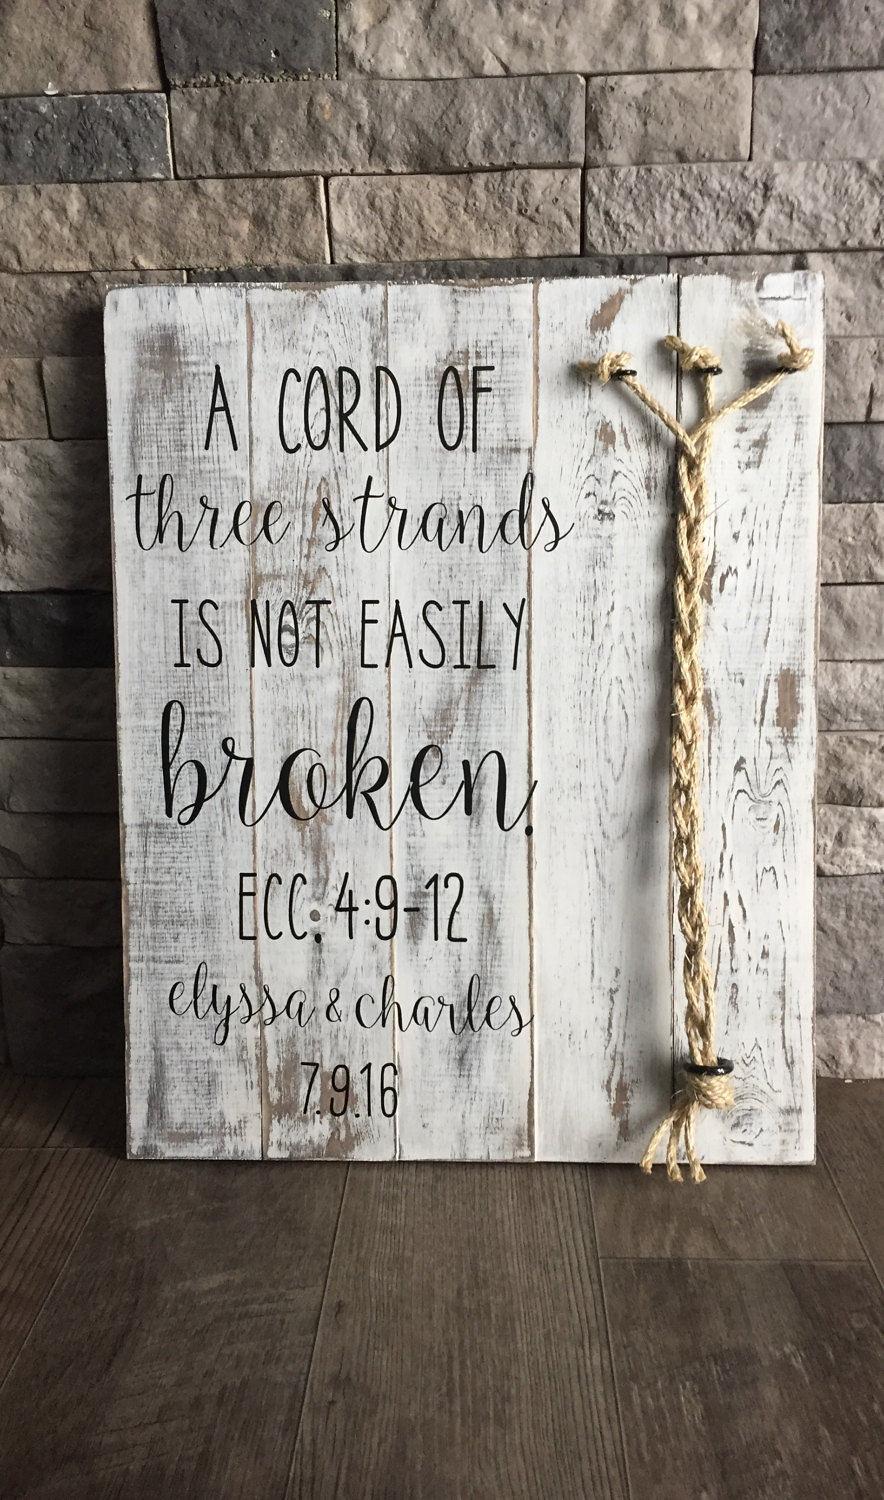 Mariage - A Cord Of Three Strands Sign, A Cord of 3 Strands, Ecclesiastes 4:9-12, Wedding Ceremony Sign, Unity Ceremony Sign, Rustic Wedding Gift